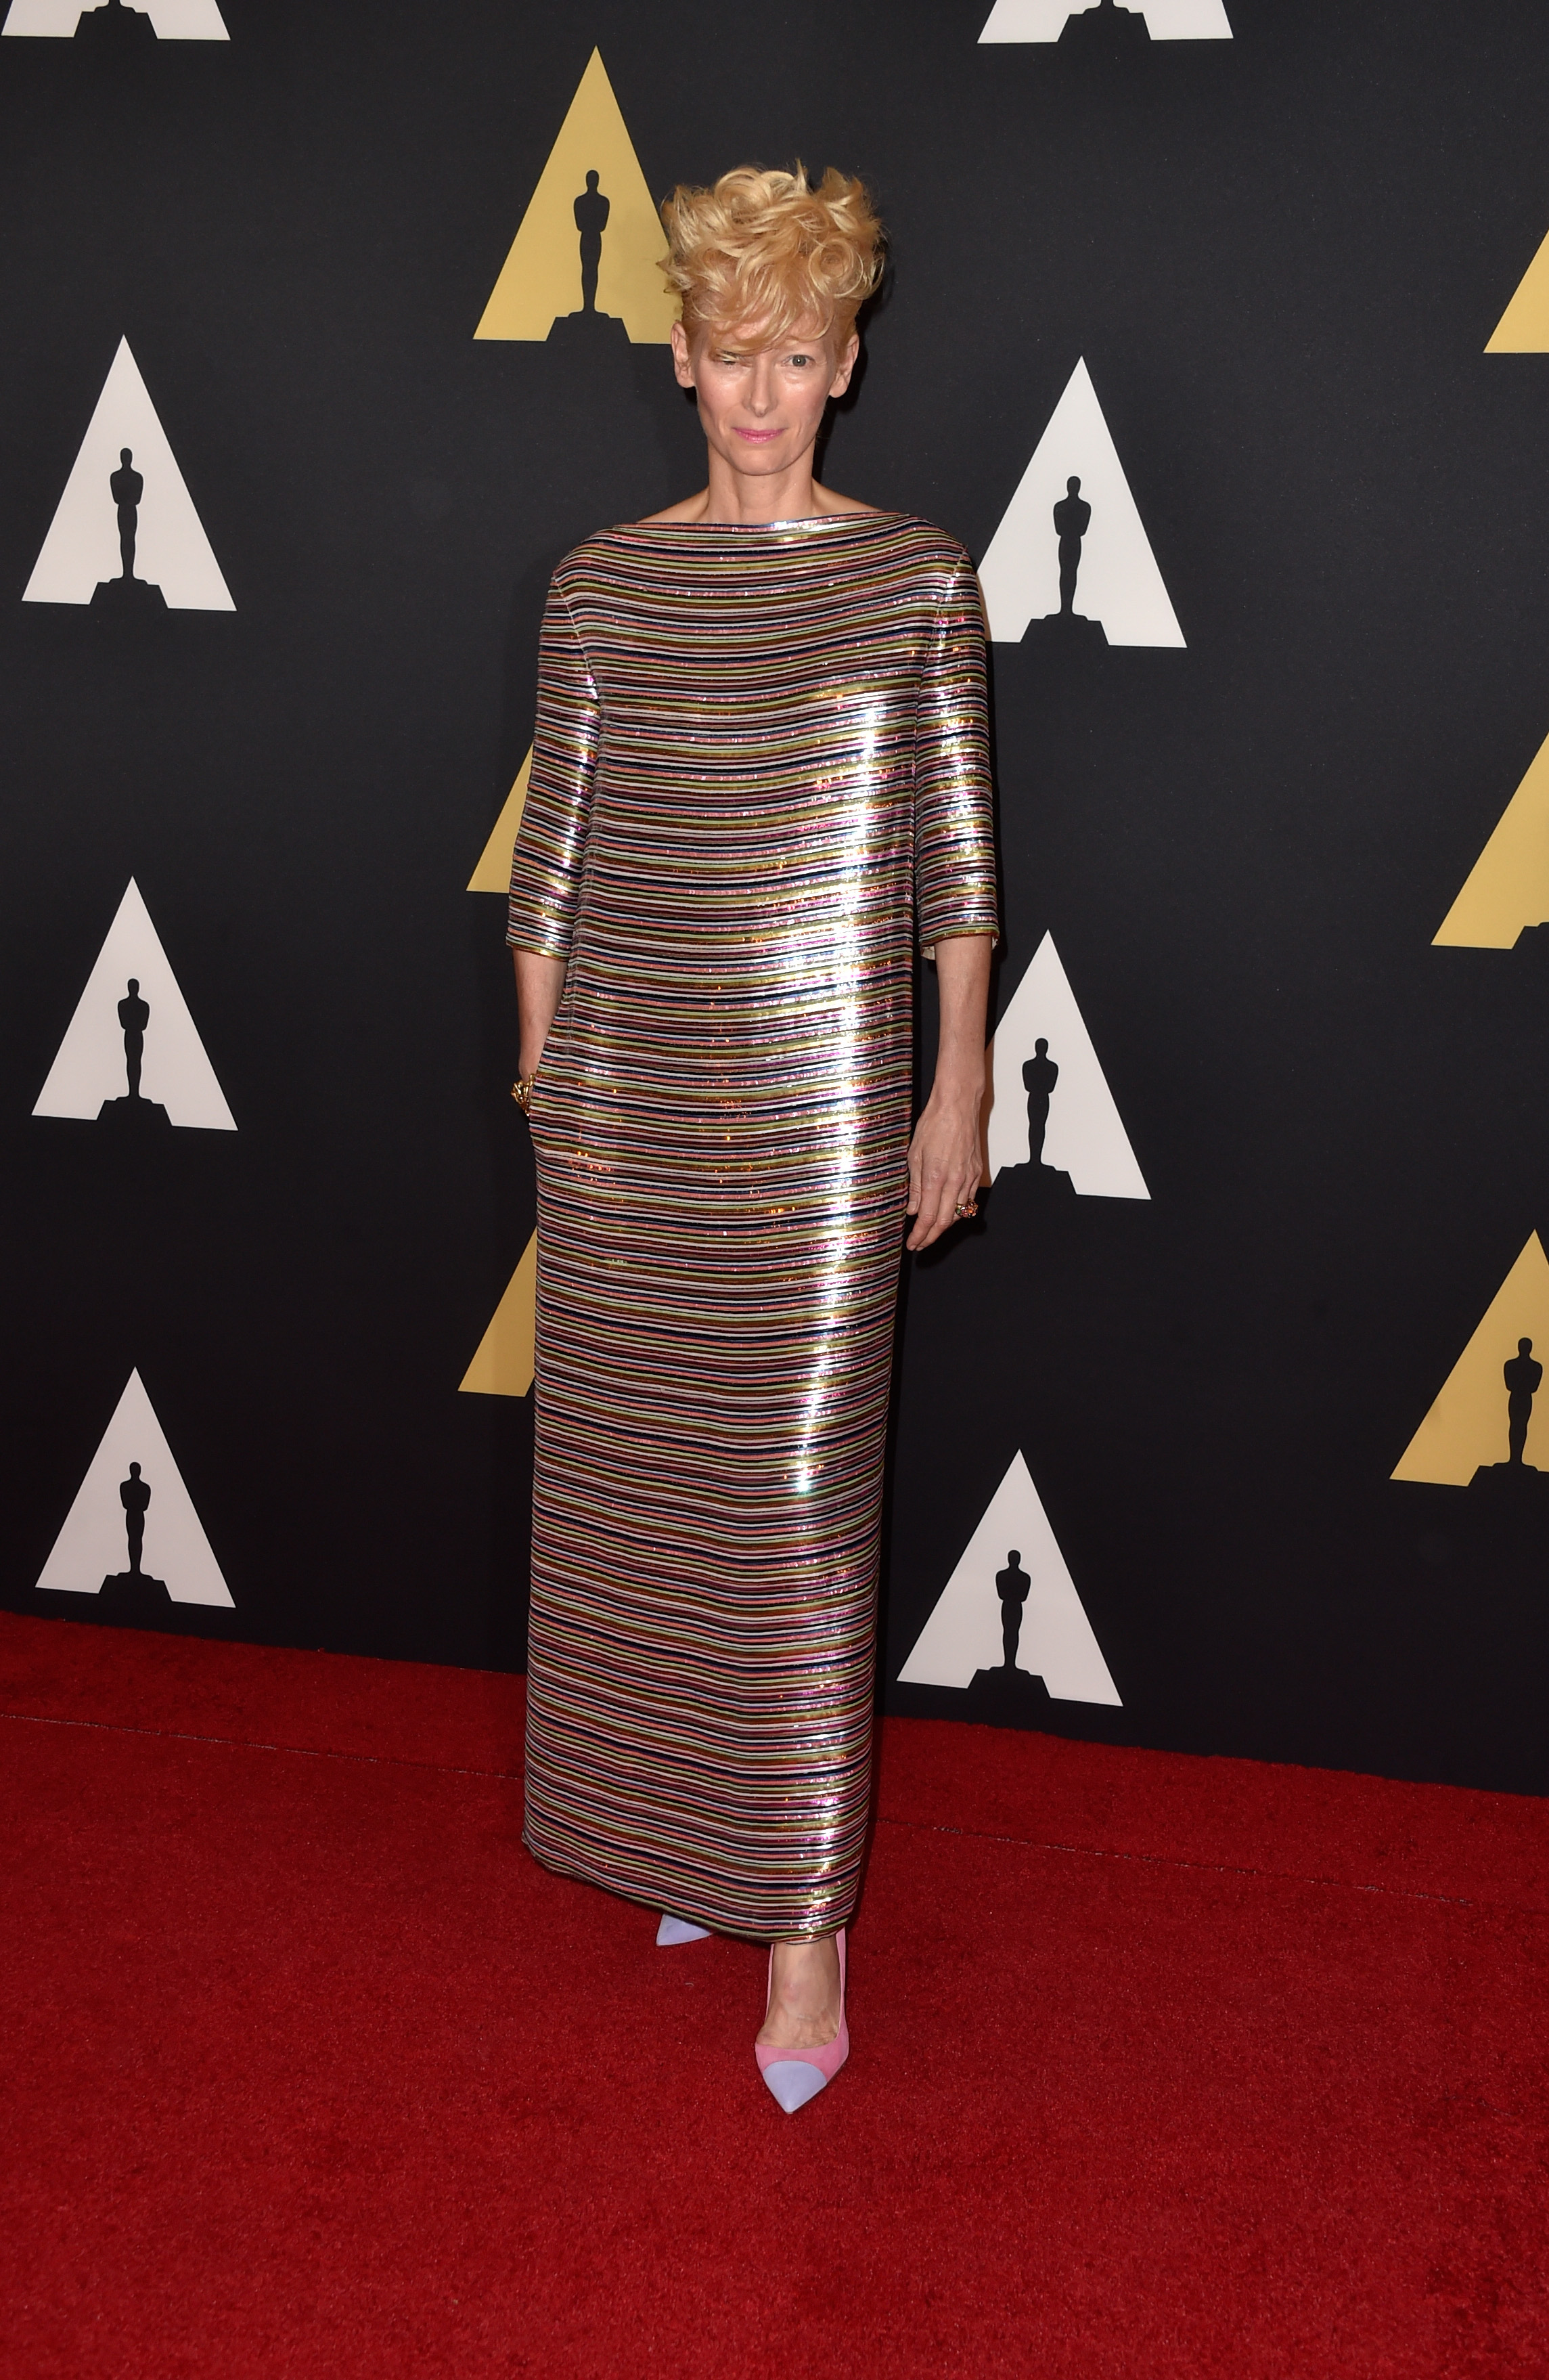 Academy Of Motion Picture Arts And Sciences' 2014 Governors Awards - Arrivals